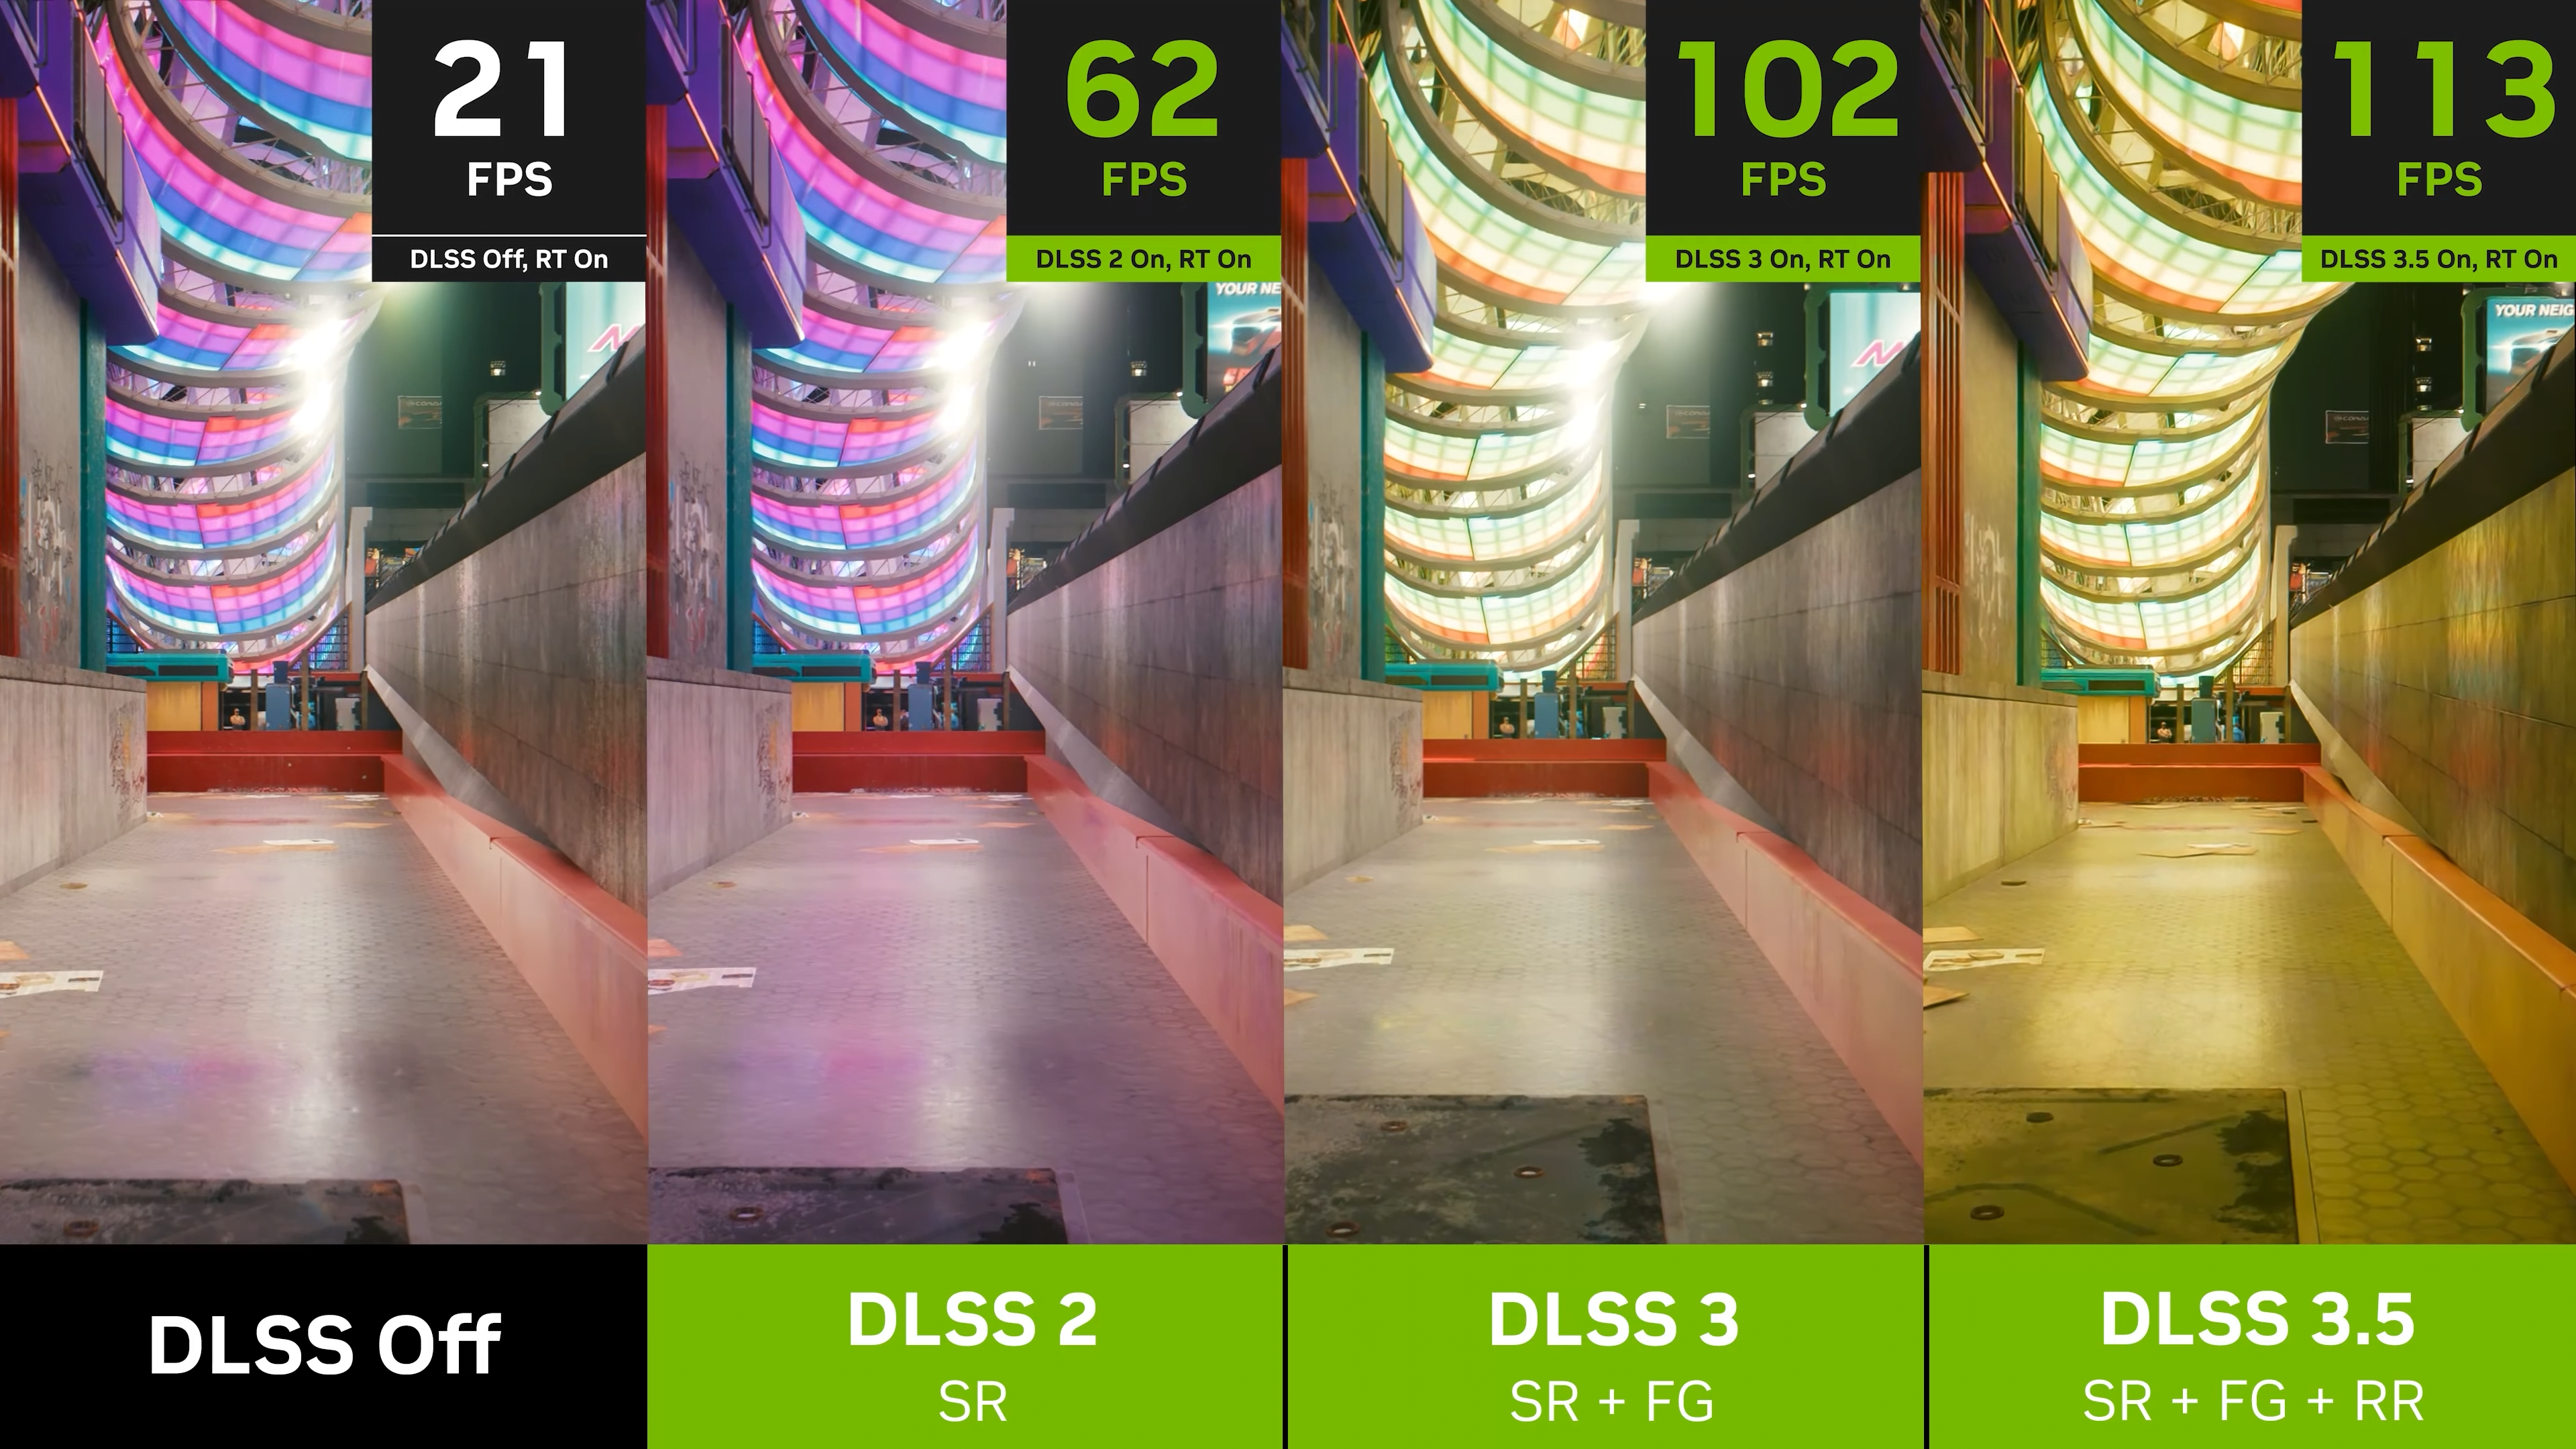 Nvidia's DLSS 3.5 brings AI rendered ray-tracing to games like Cyperpunk 2077